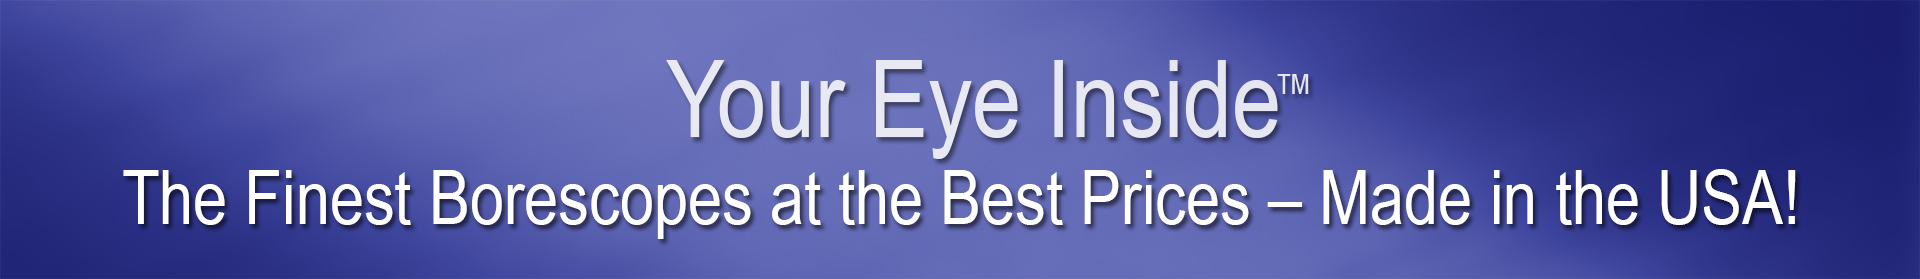 Your Eye Inside - The finest borescopes at the best prices - made in the USA